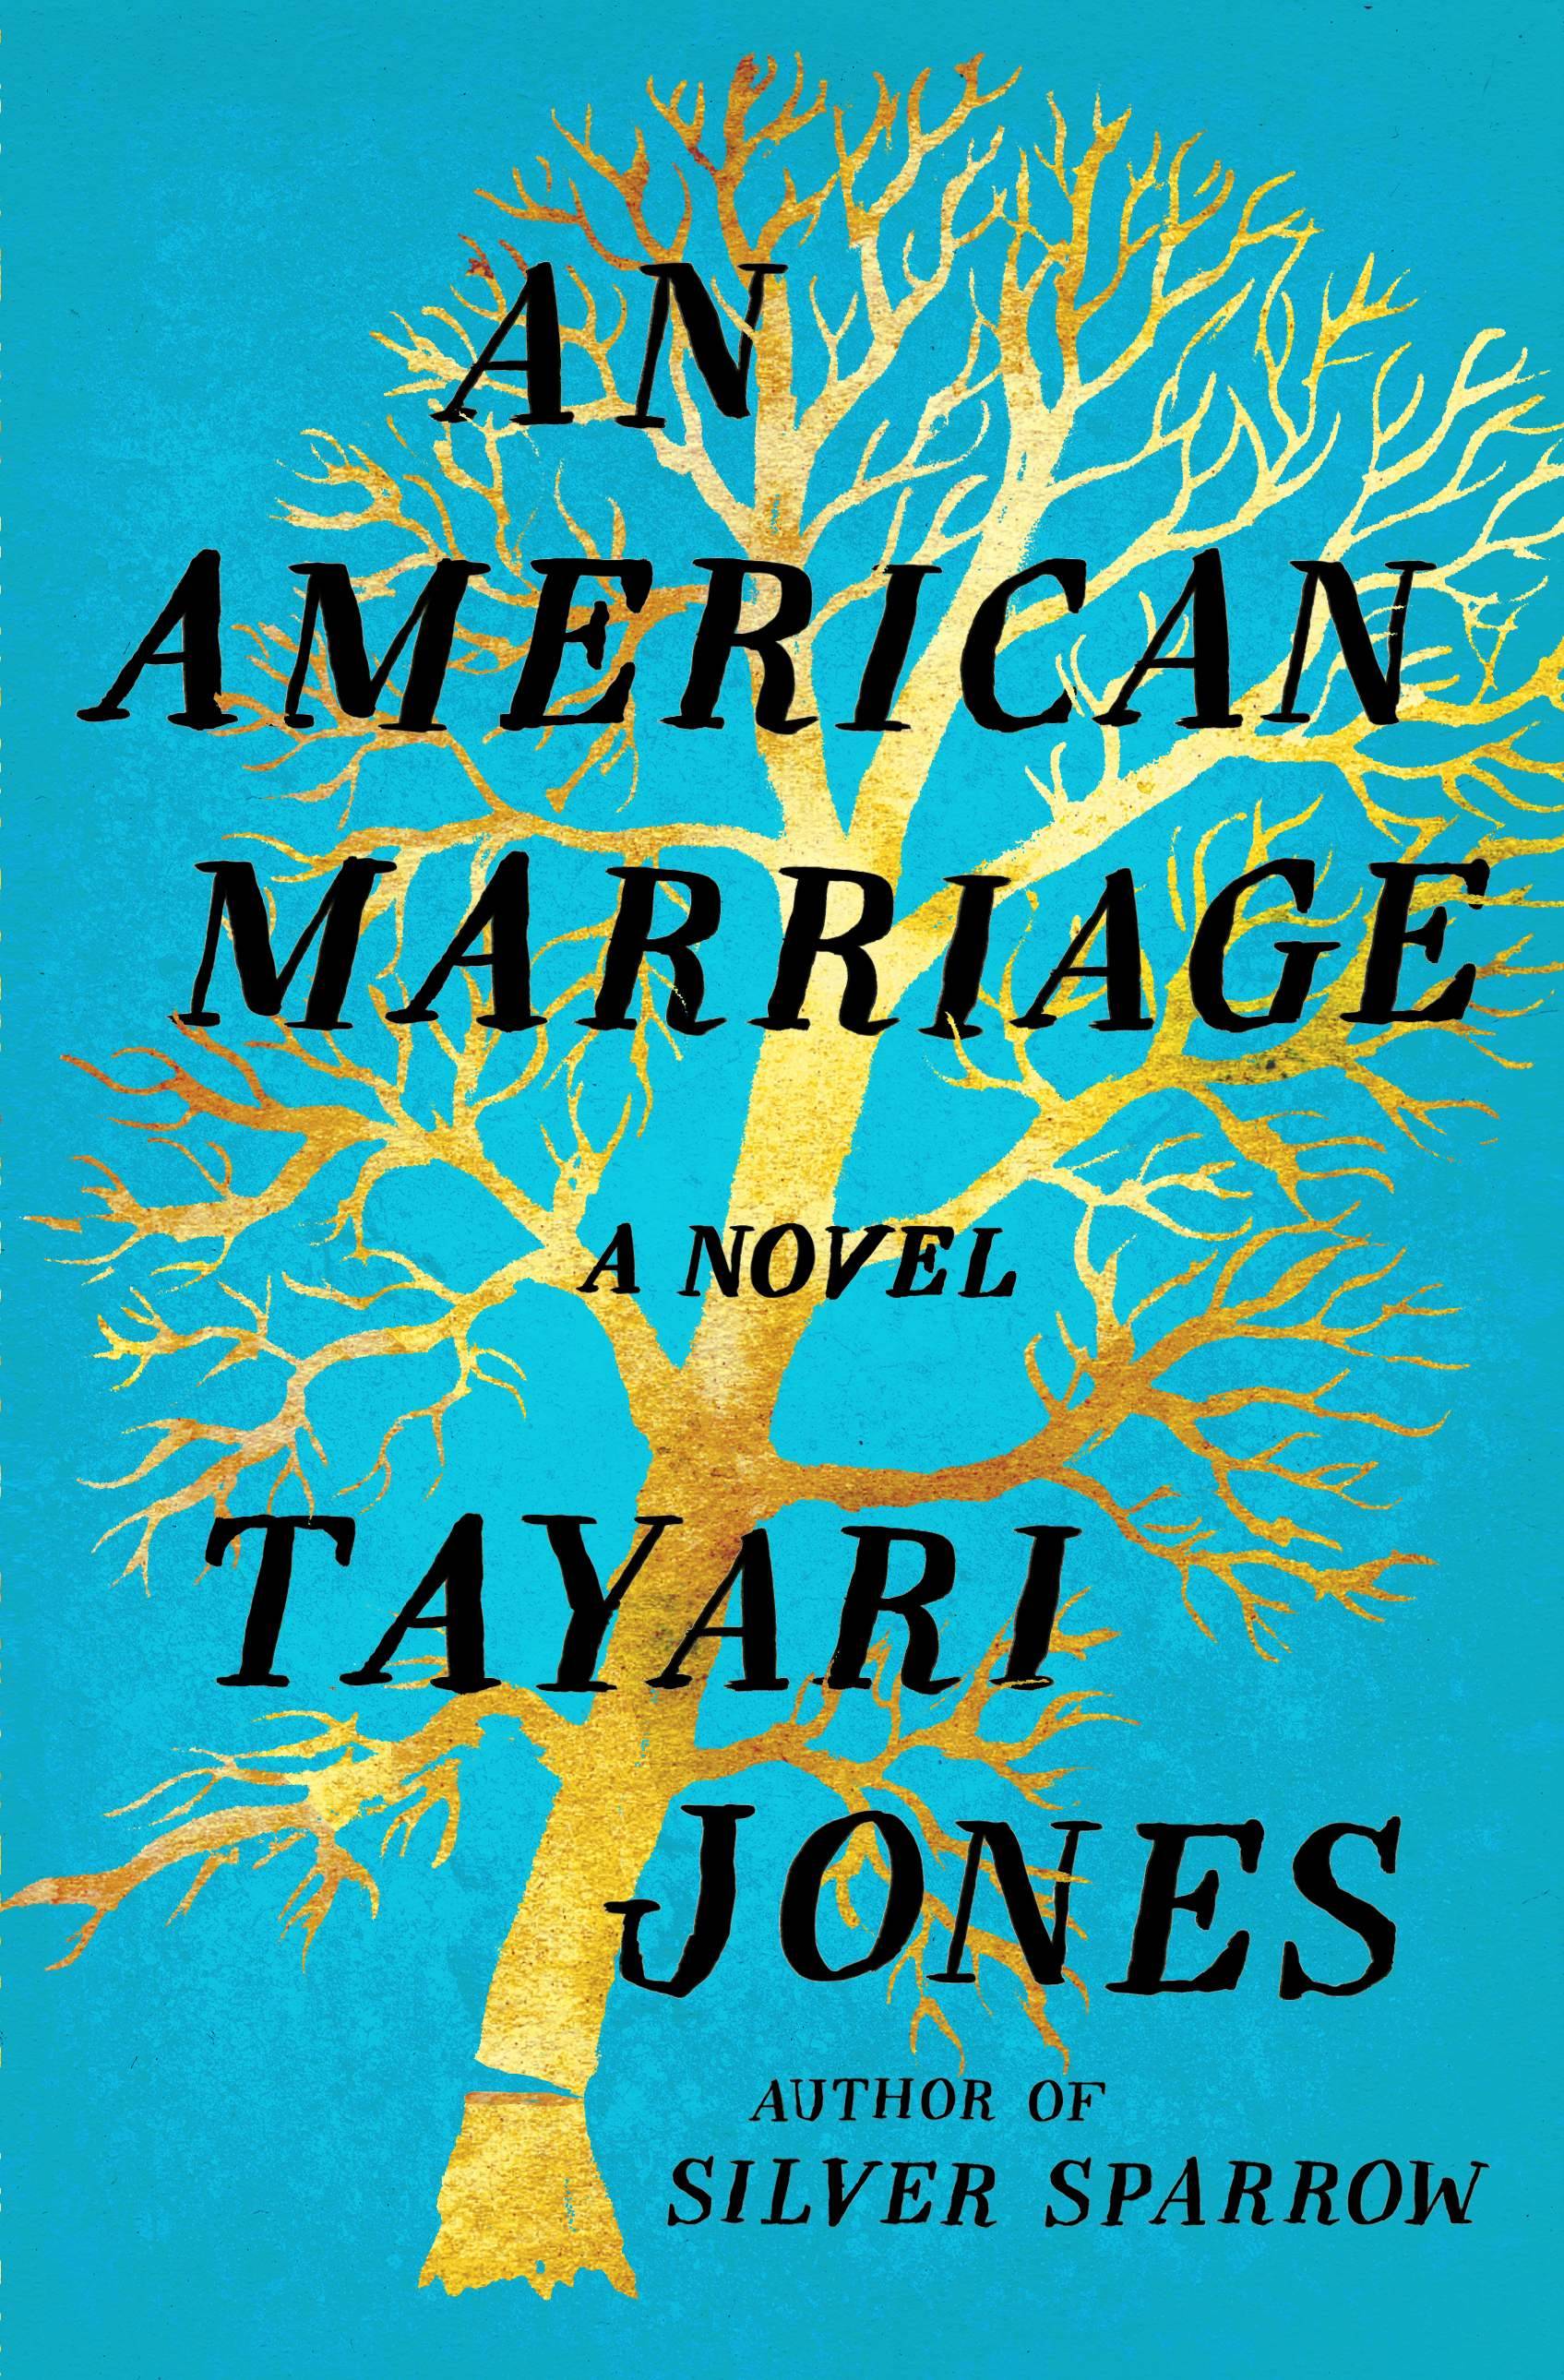 The Bookworm Sez: ‘An American Marriage’ one of Oprah’s picks